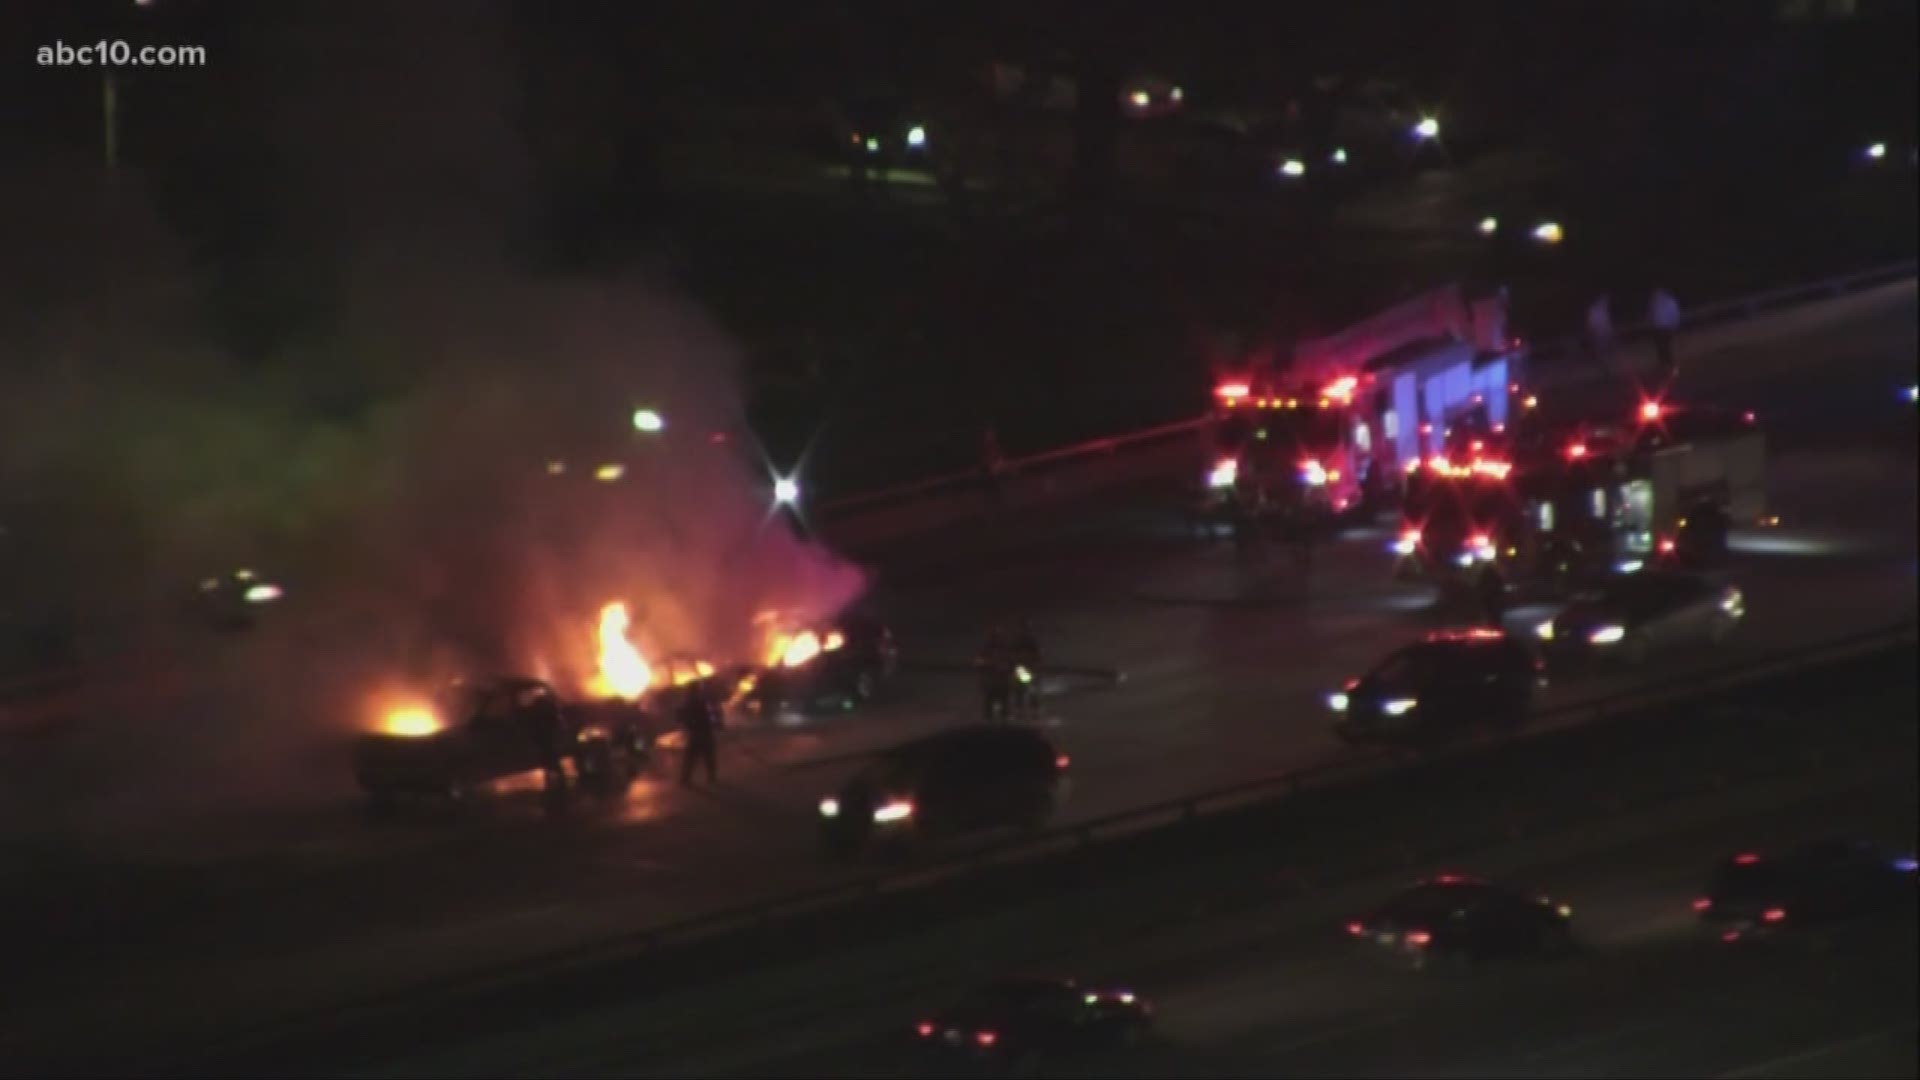 The crash happened along westbound HW-50 at 15th Street. According to Caltrans, the three car crash blocked four lanes and resulted in a vehicle fire.